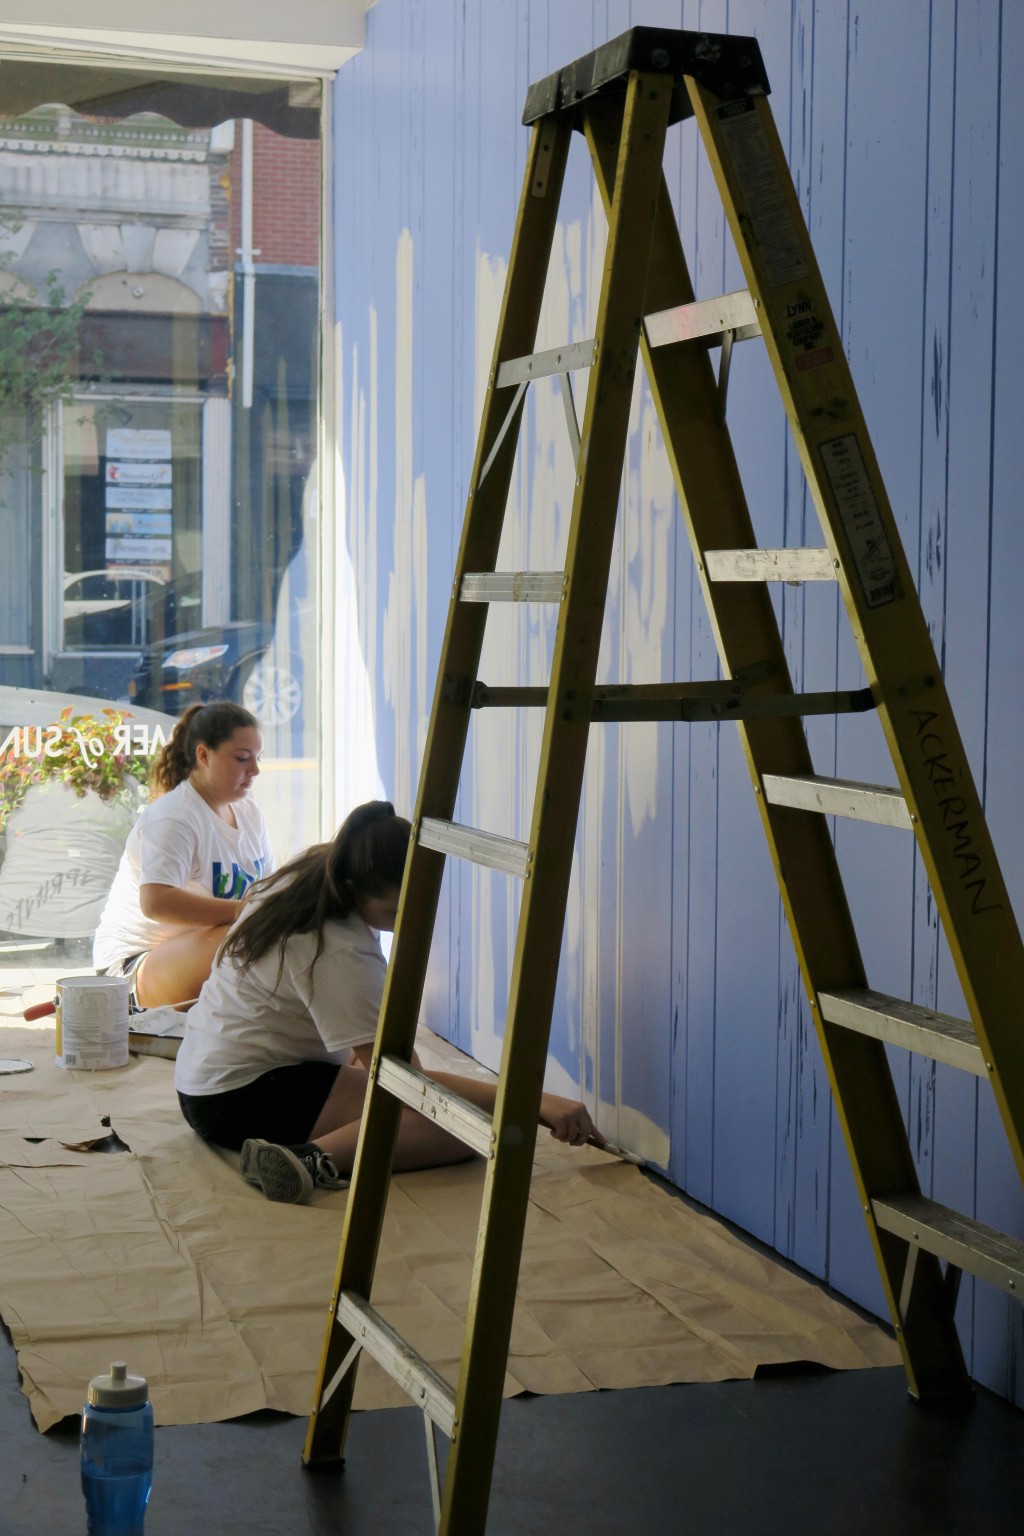 UNE students get some painting done at Engine, a community-based arts hub on Main Street in Biddeford.